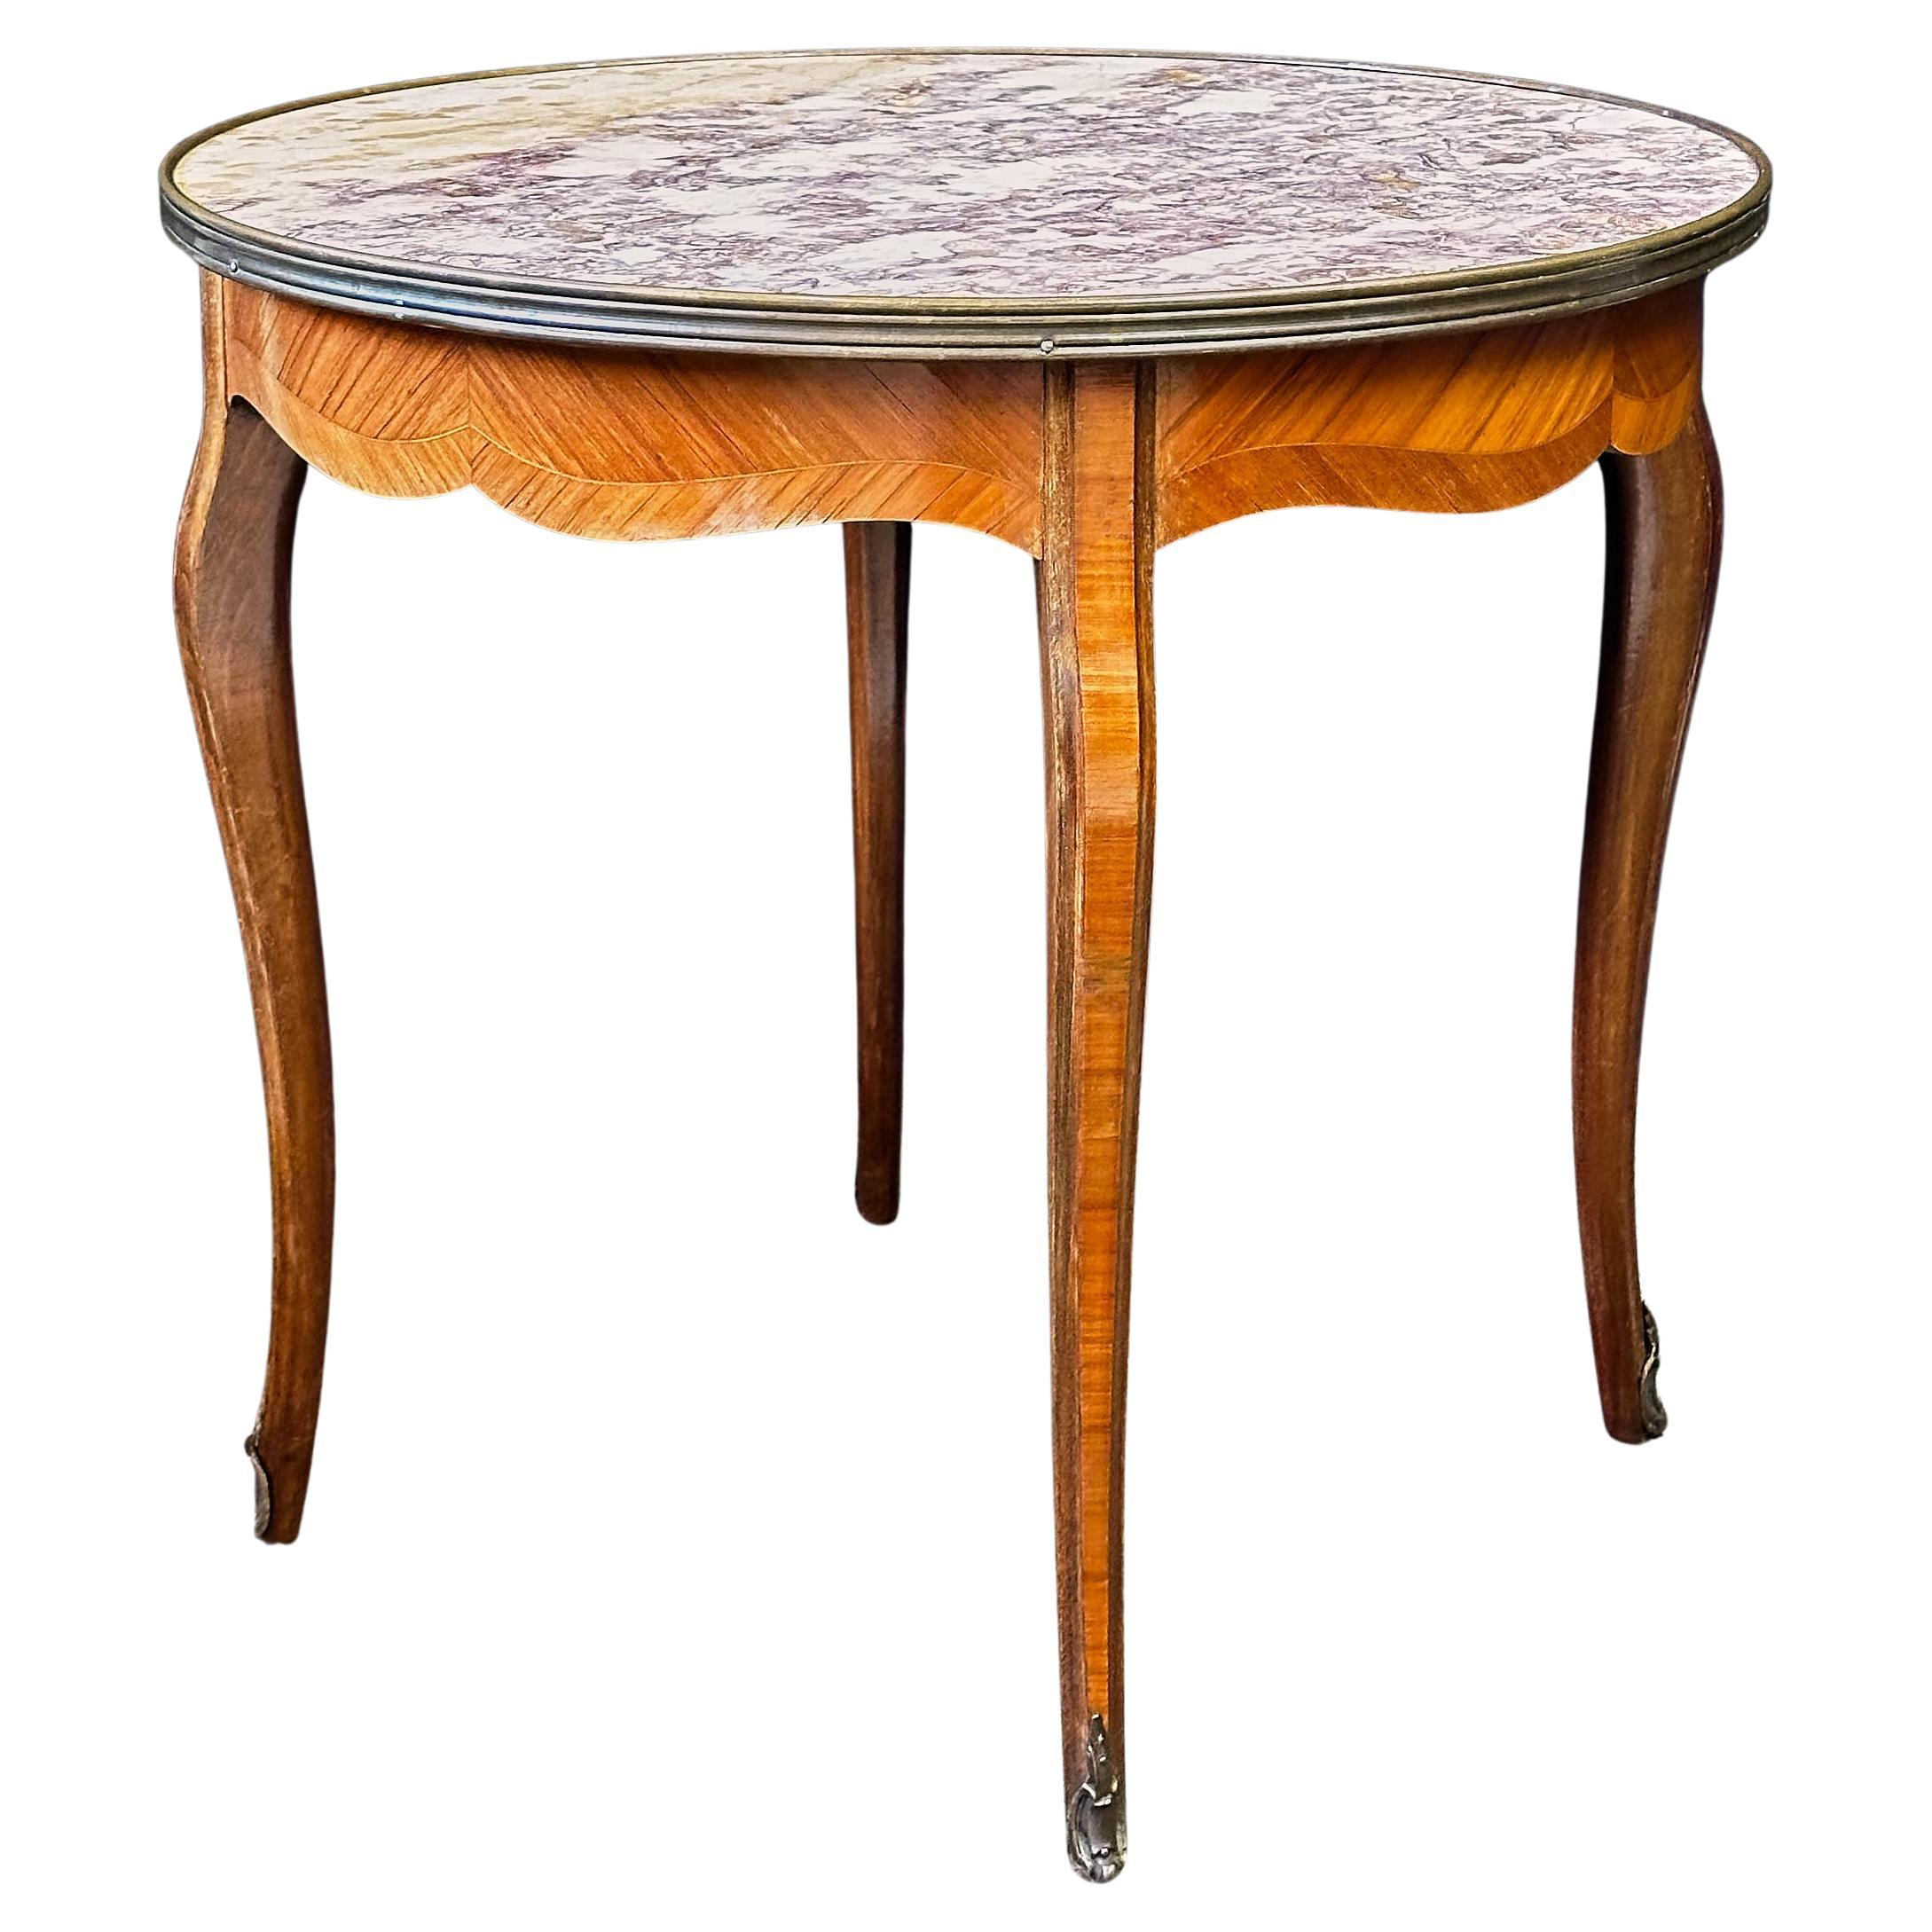 Italian Marble Top Side Table, Circa 1940s For Sale